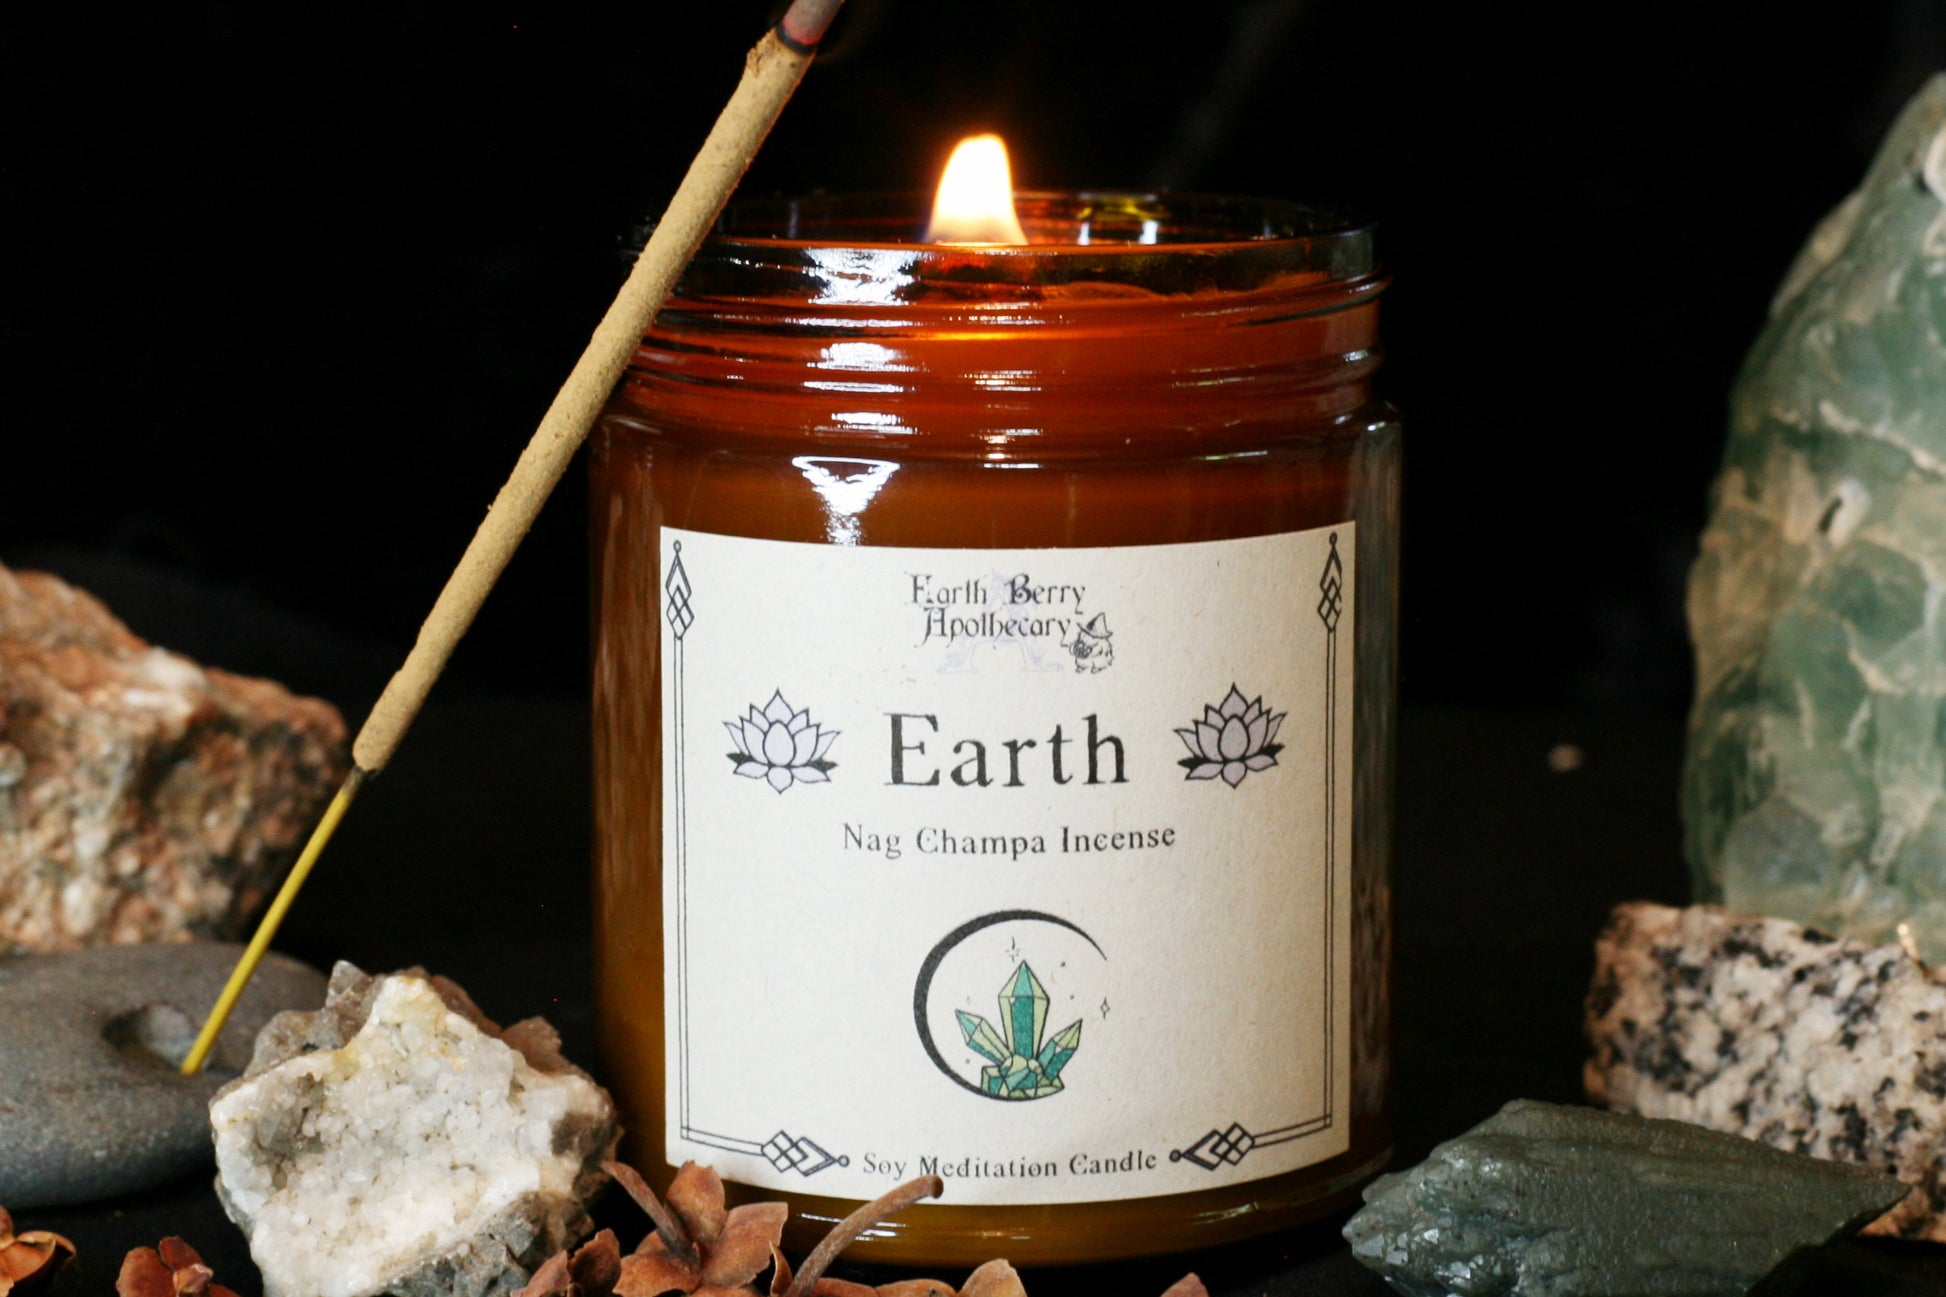 Earth element nag Champa incense scented crackling wood wick soy candle